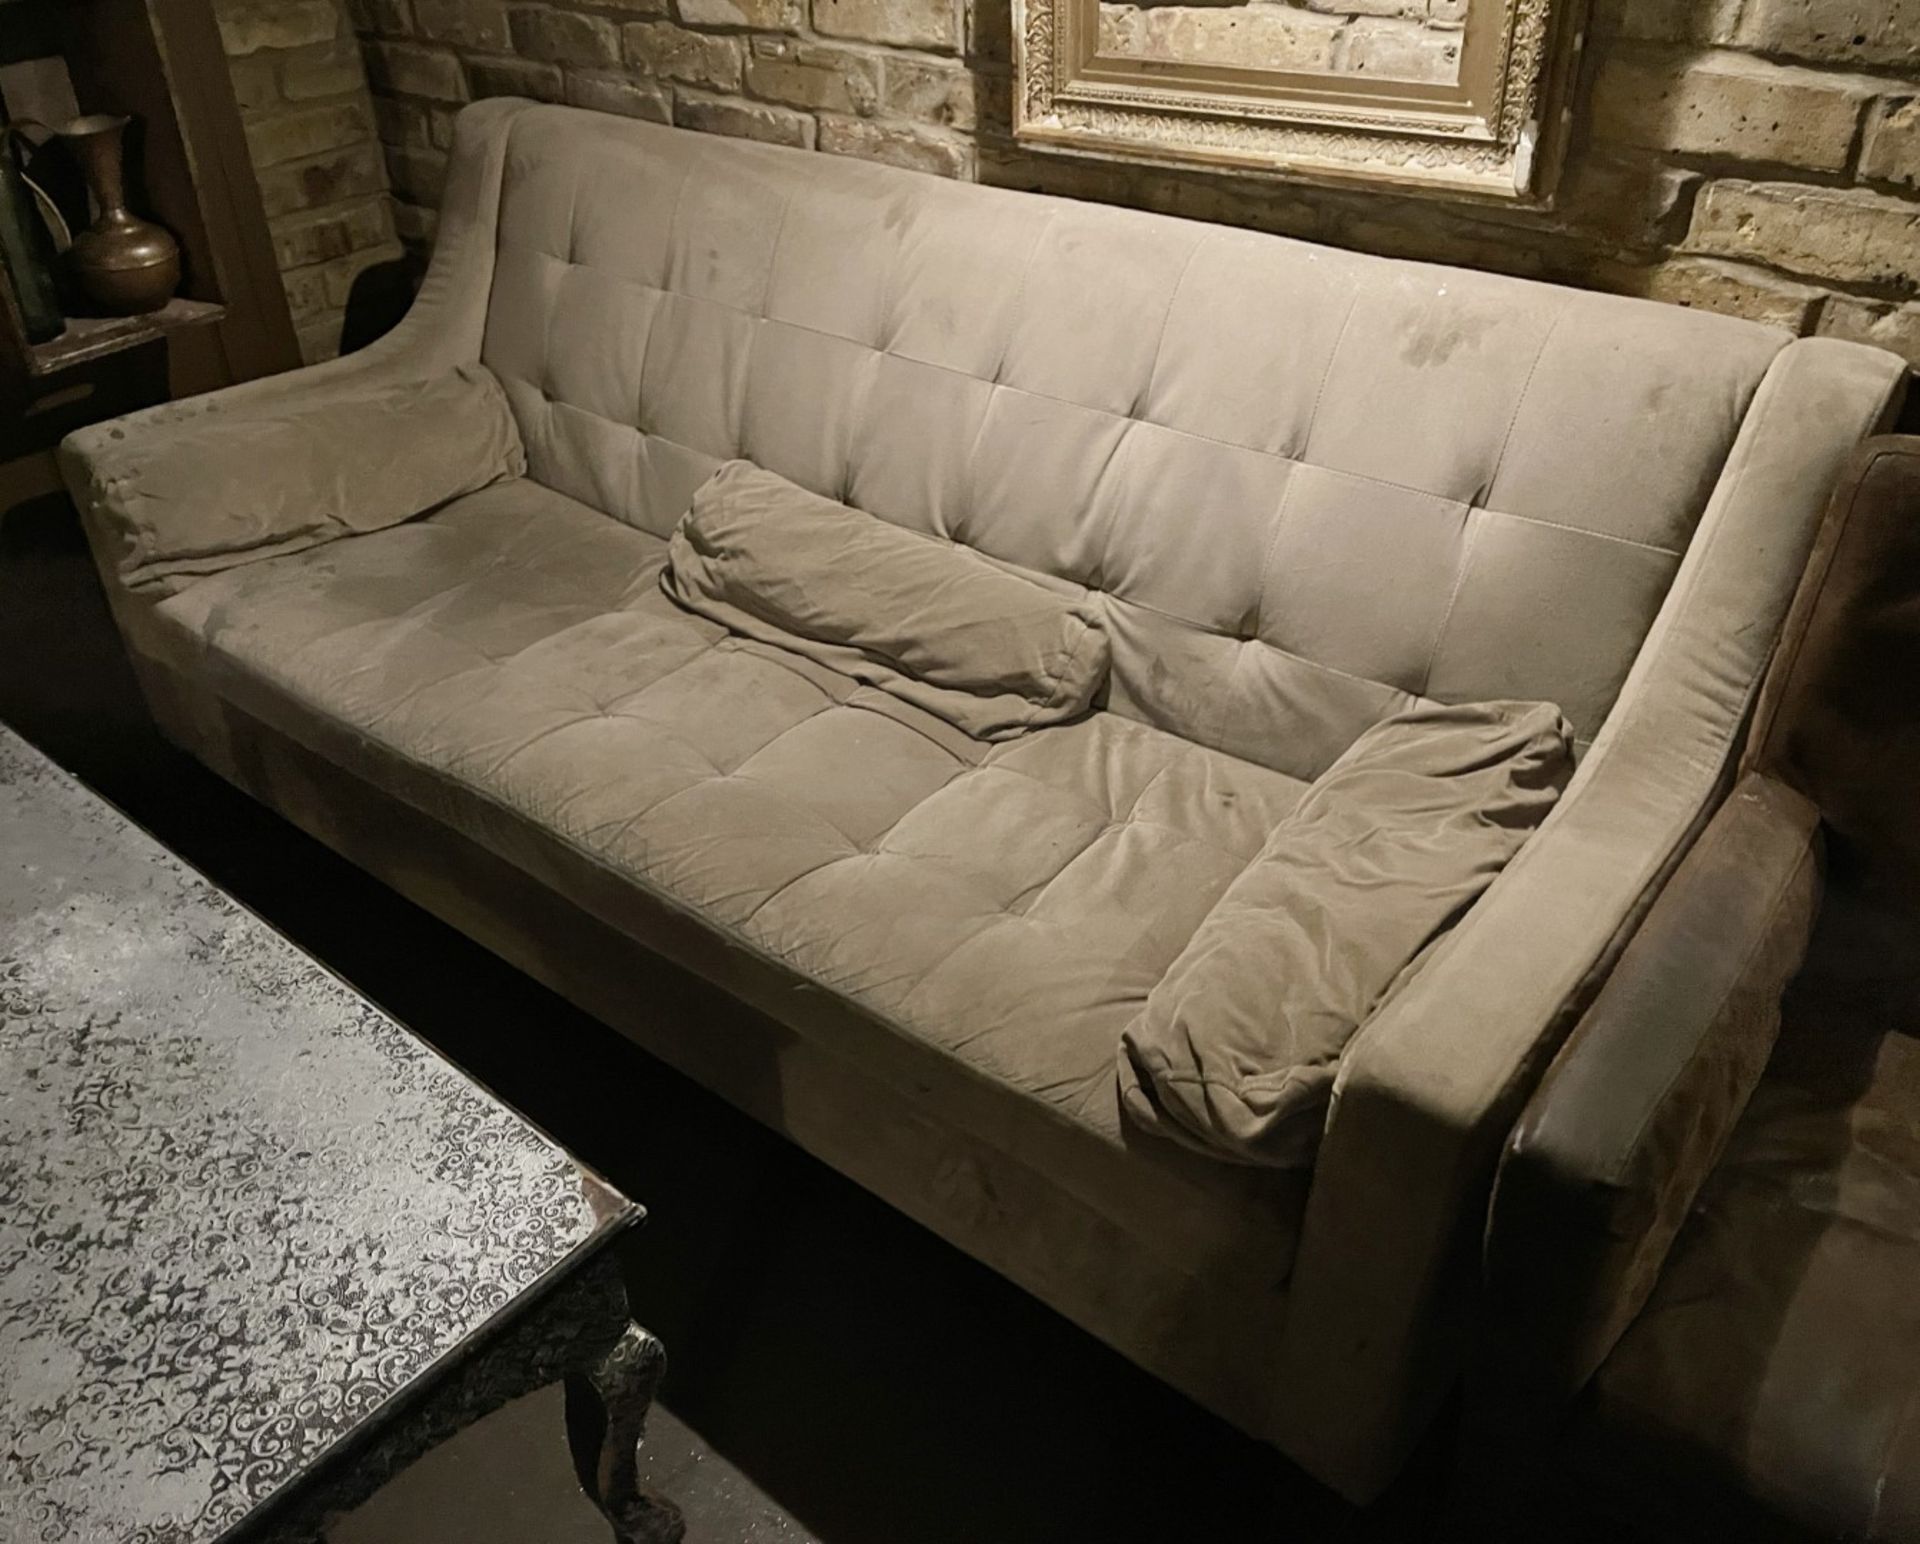 1 x Stylish Tufted Velvet Upholstered 3-Seater Sofa in a Neutral Off-white Hue - Image 6 of 8